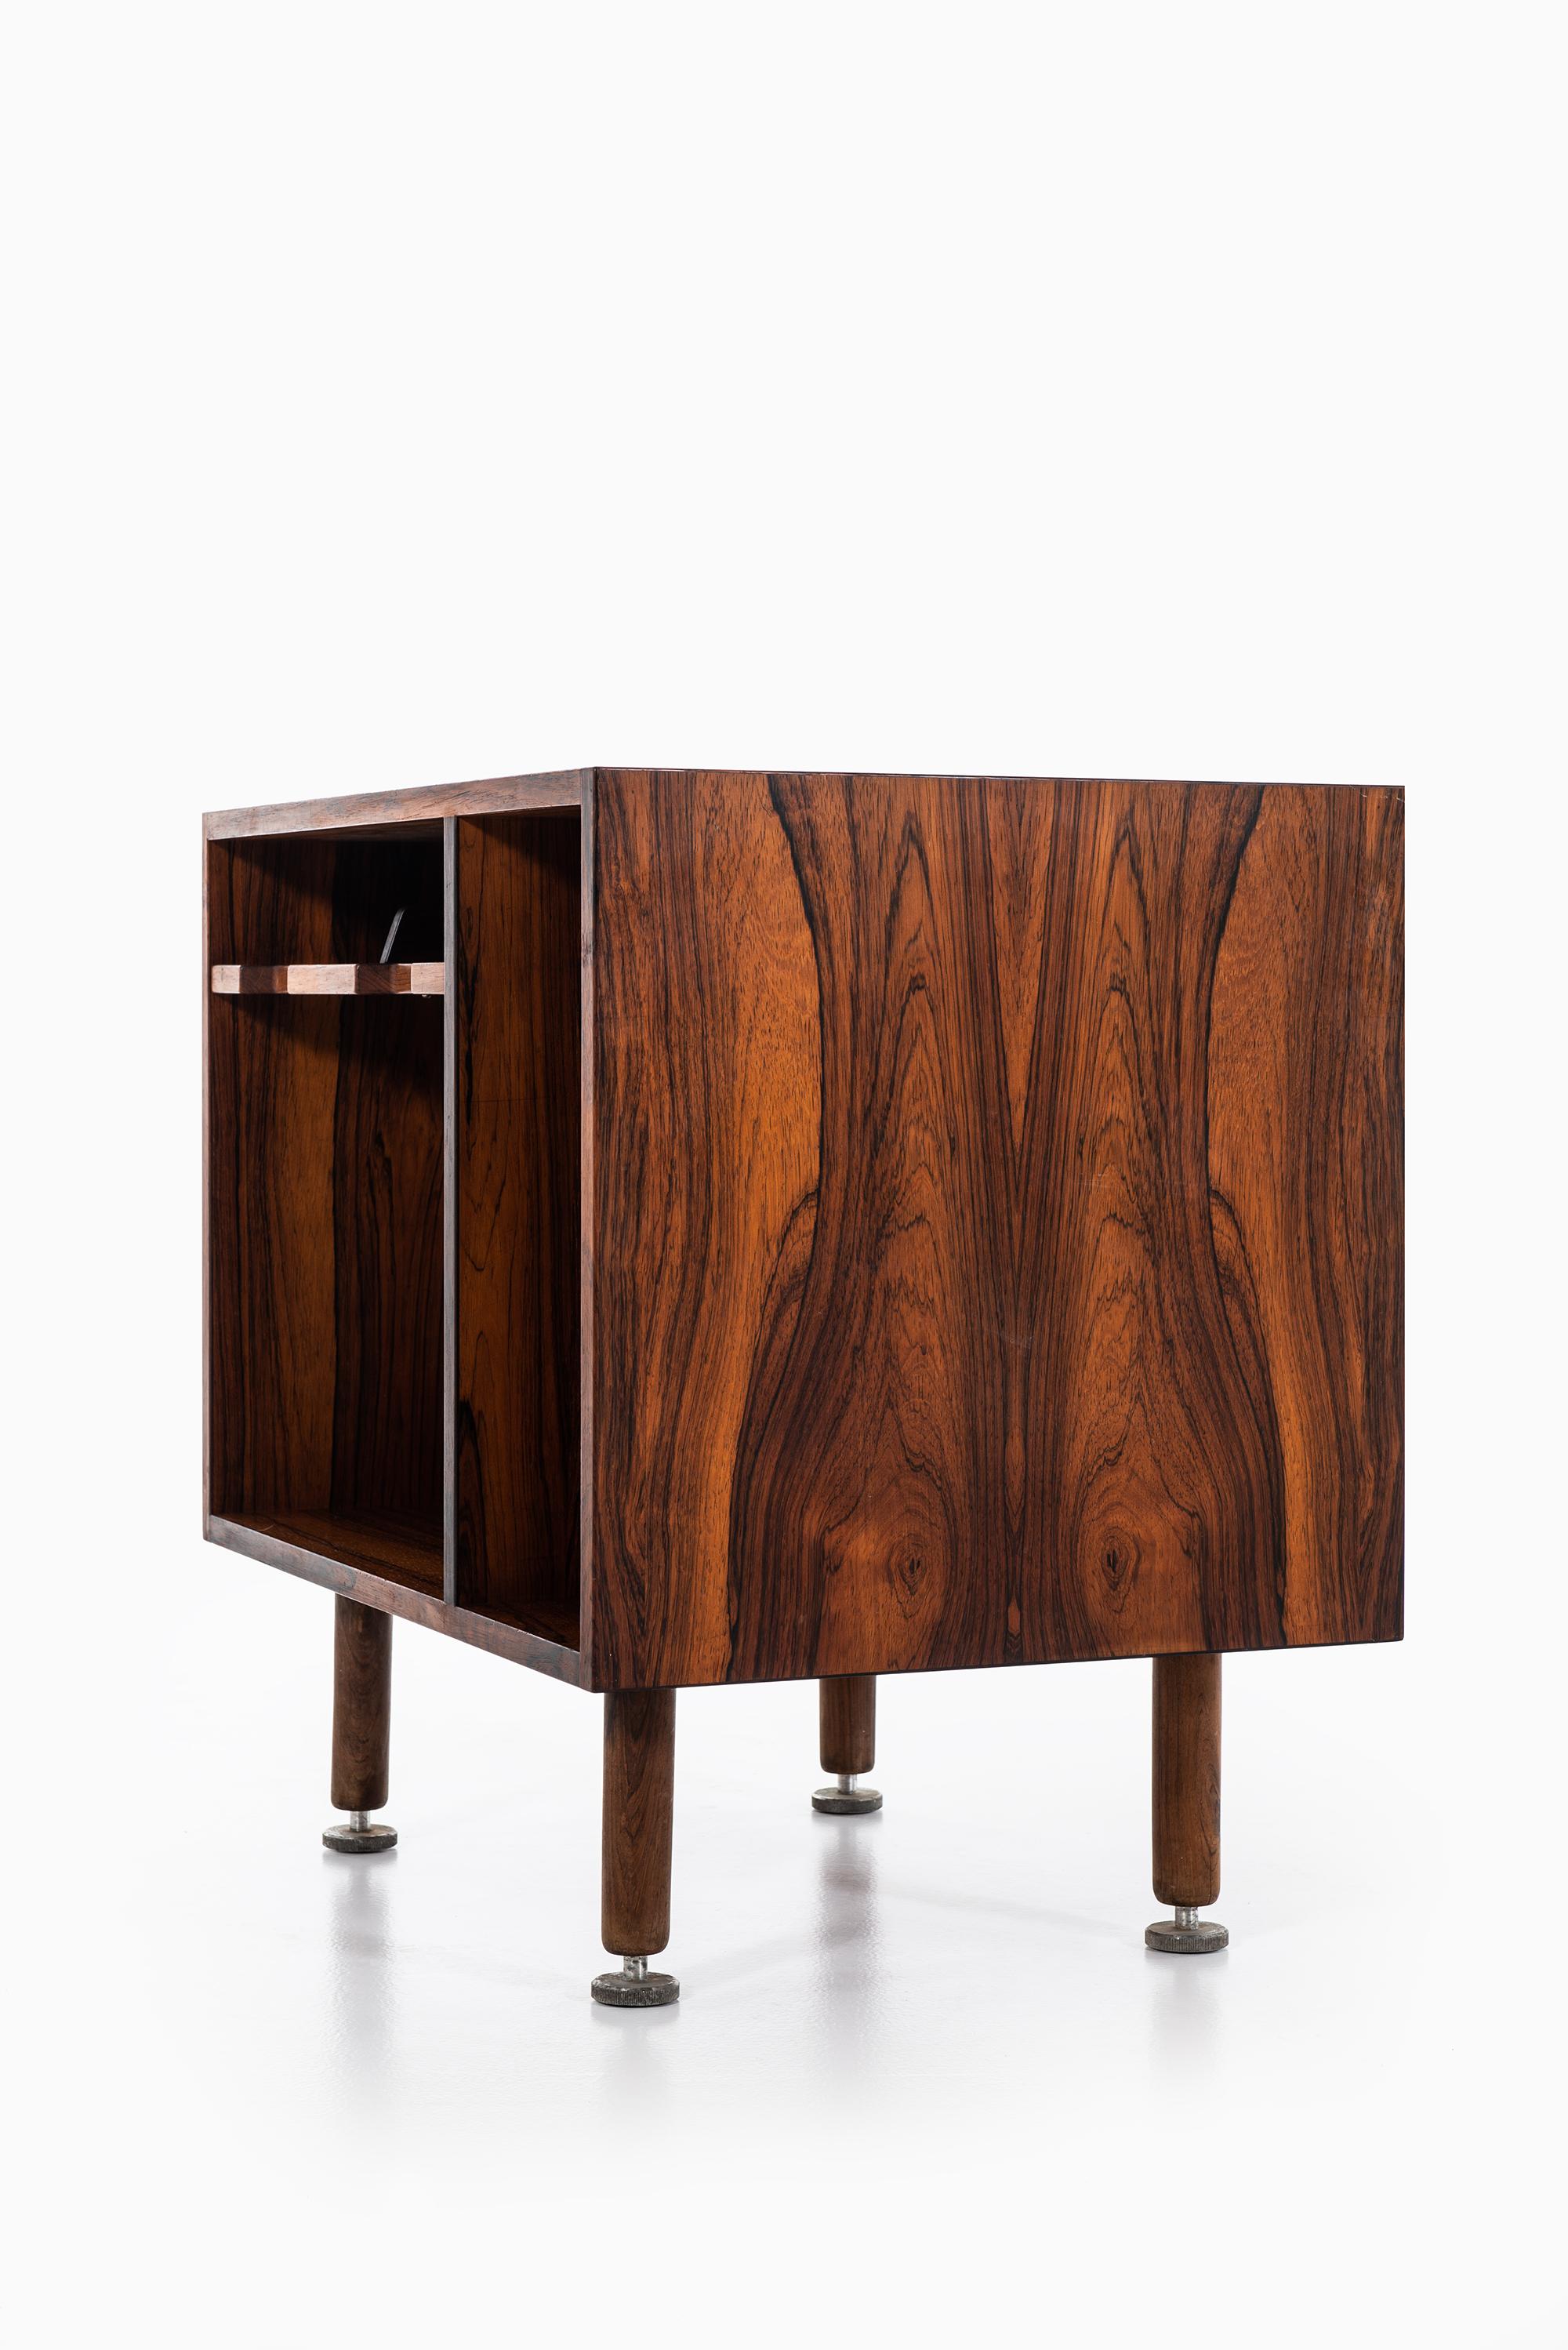 Jens Risom Cabinet in Rosewood Produced by Gutenberghus in Denmark In Good Condition For Sale In Limhamn, Skåne län